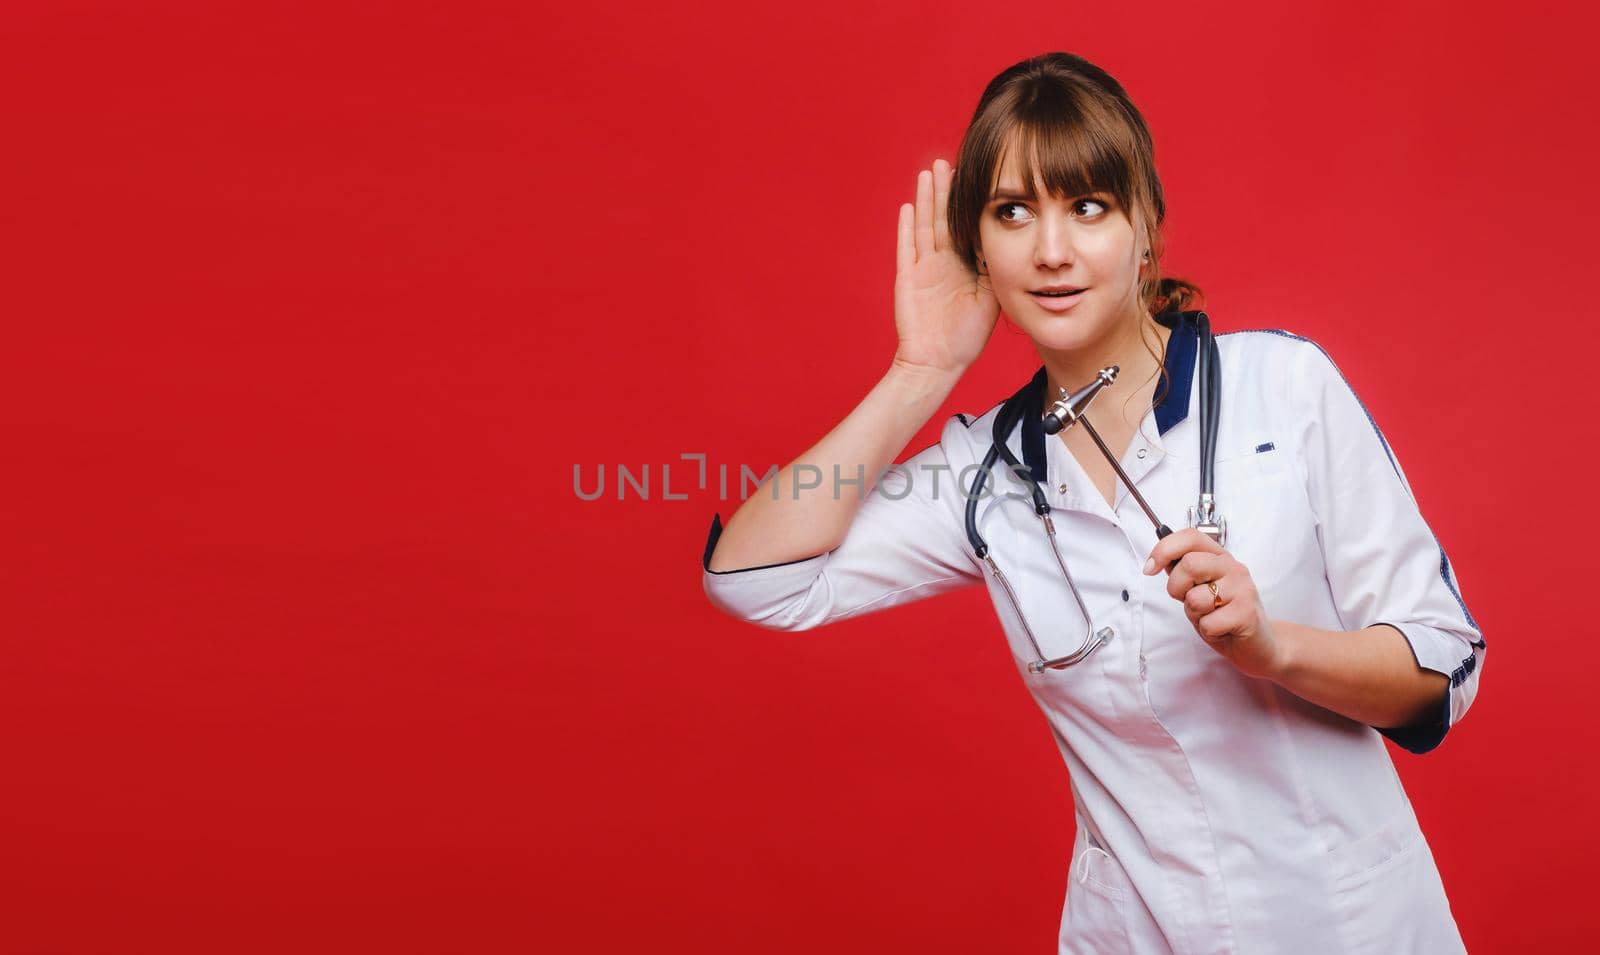 A doctor in a white coat on a red background holds a neurological hammer and listens to something.